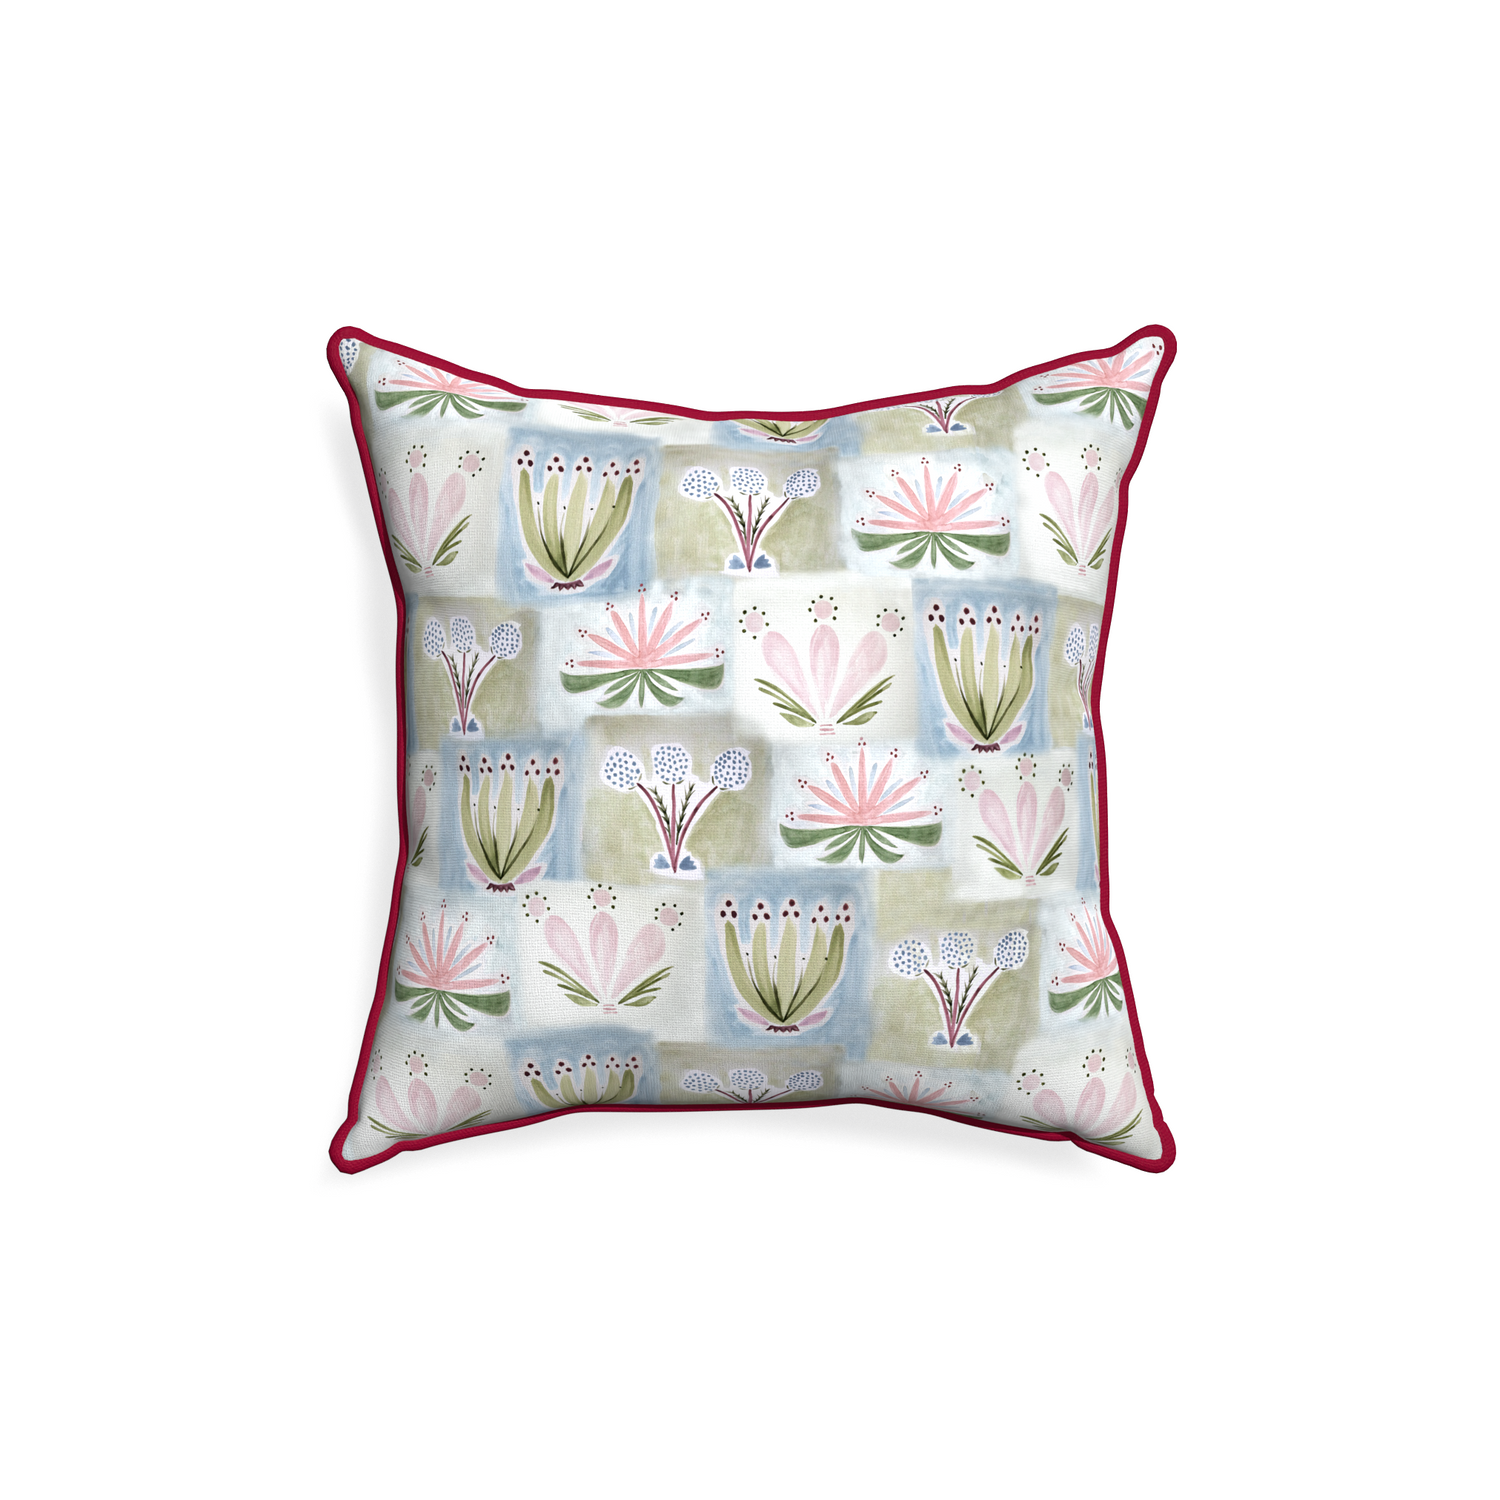 18-square harper custom hand-painted floralpillow with raspberry piping on white background